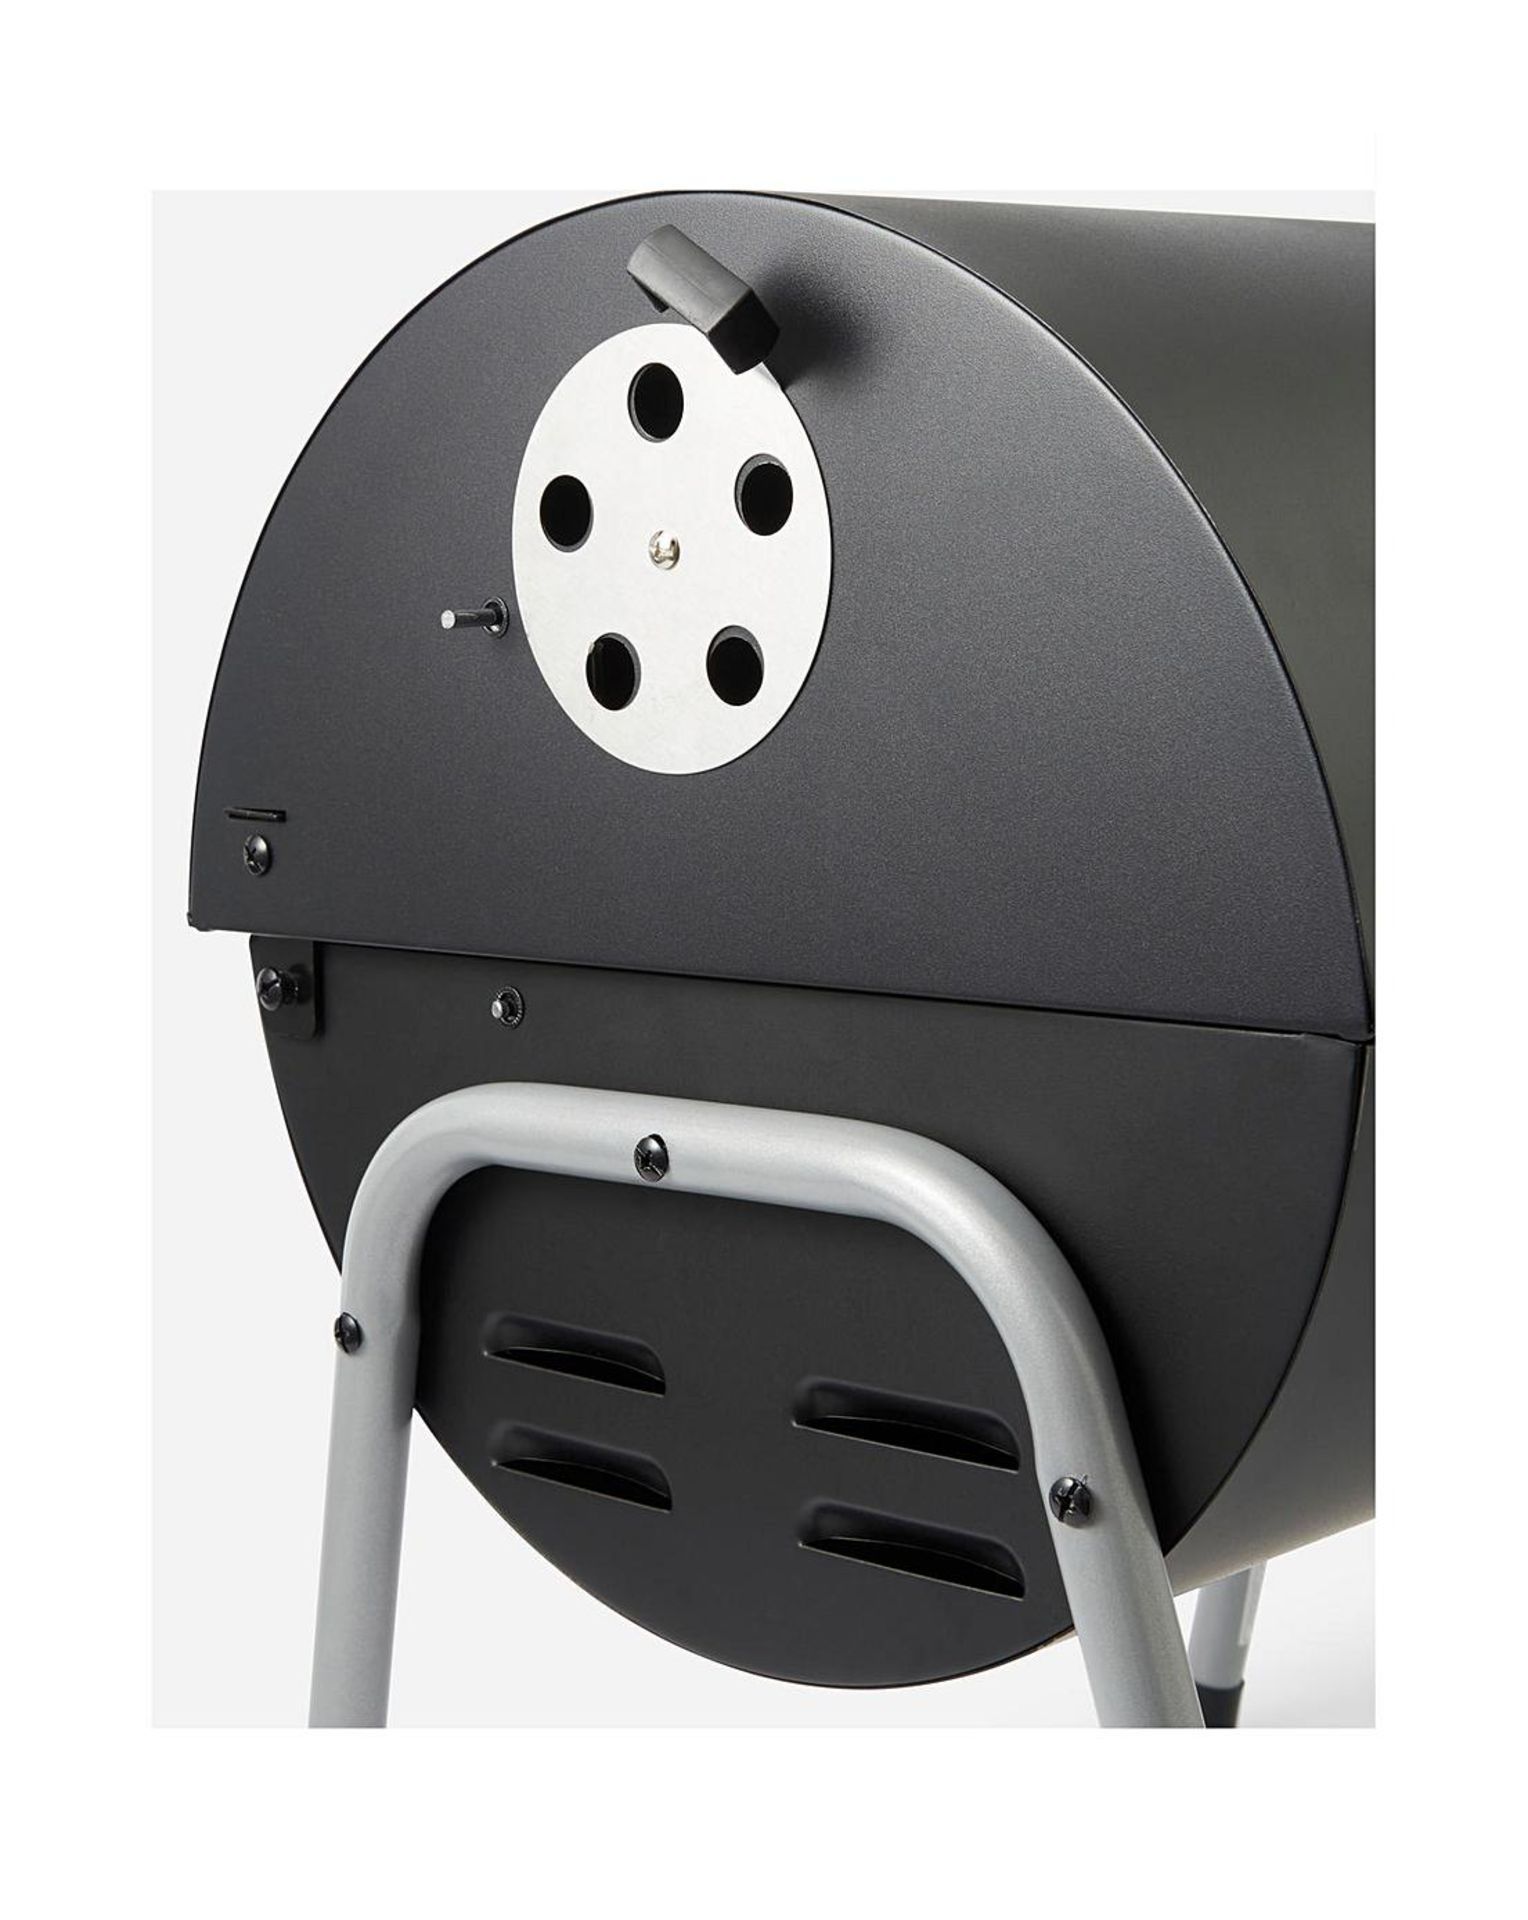 4x BRAND NEW Tabletop Oil Drum Barbeque Grill. RRP £59.99 EACH. Black steel firebowl with enamel - Image 4 of 4